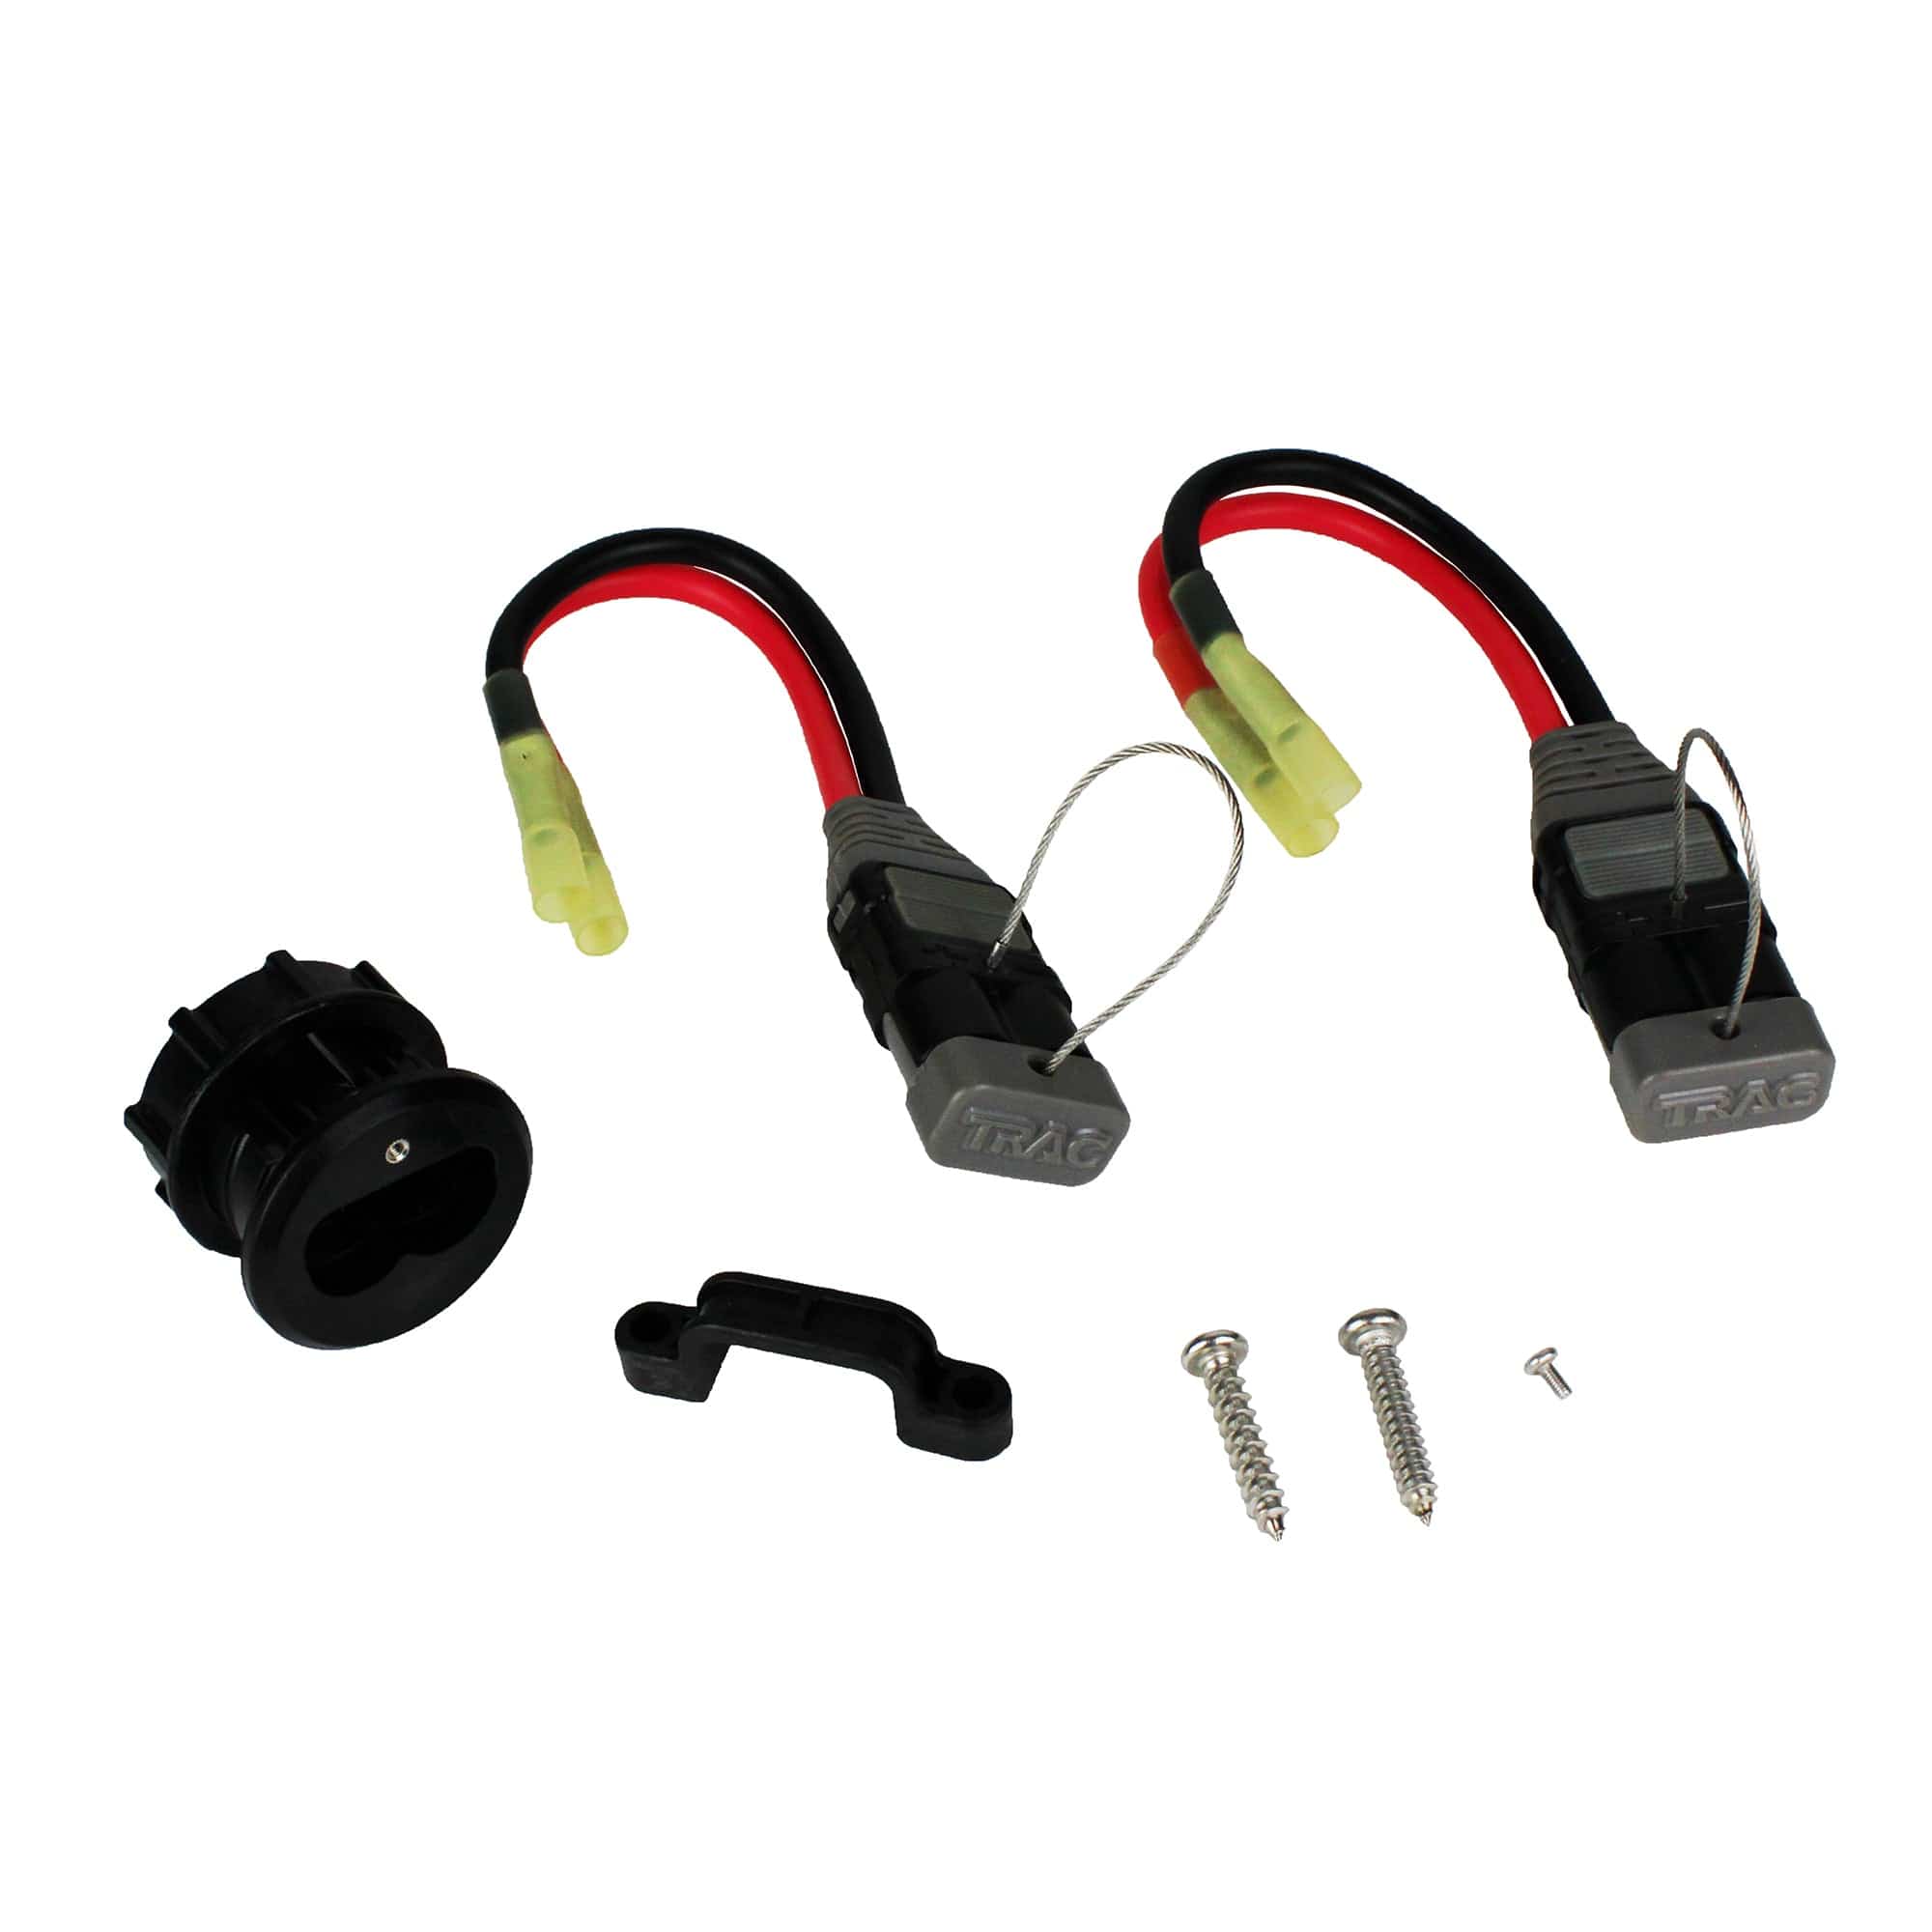 Camco 69441 Trac Outdoors High-Current Trolling Motor Connector Kit, 8 Gauge